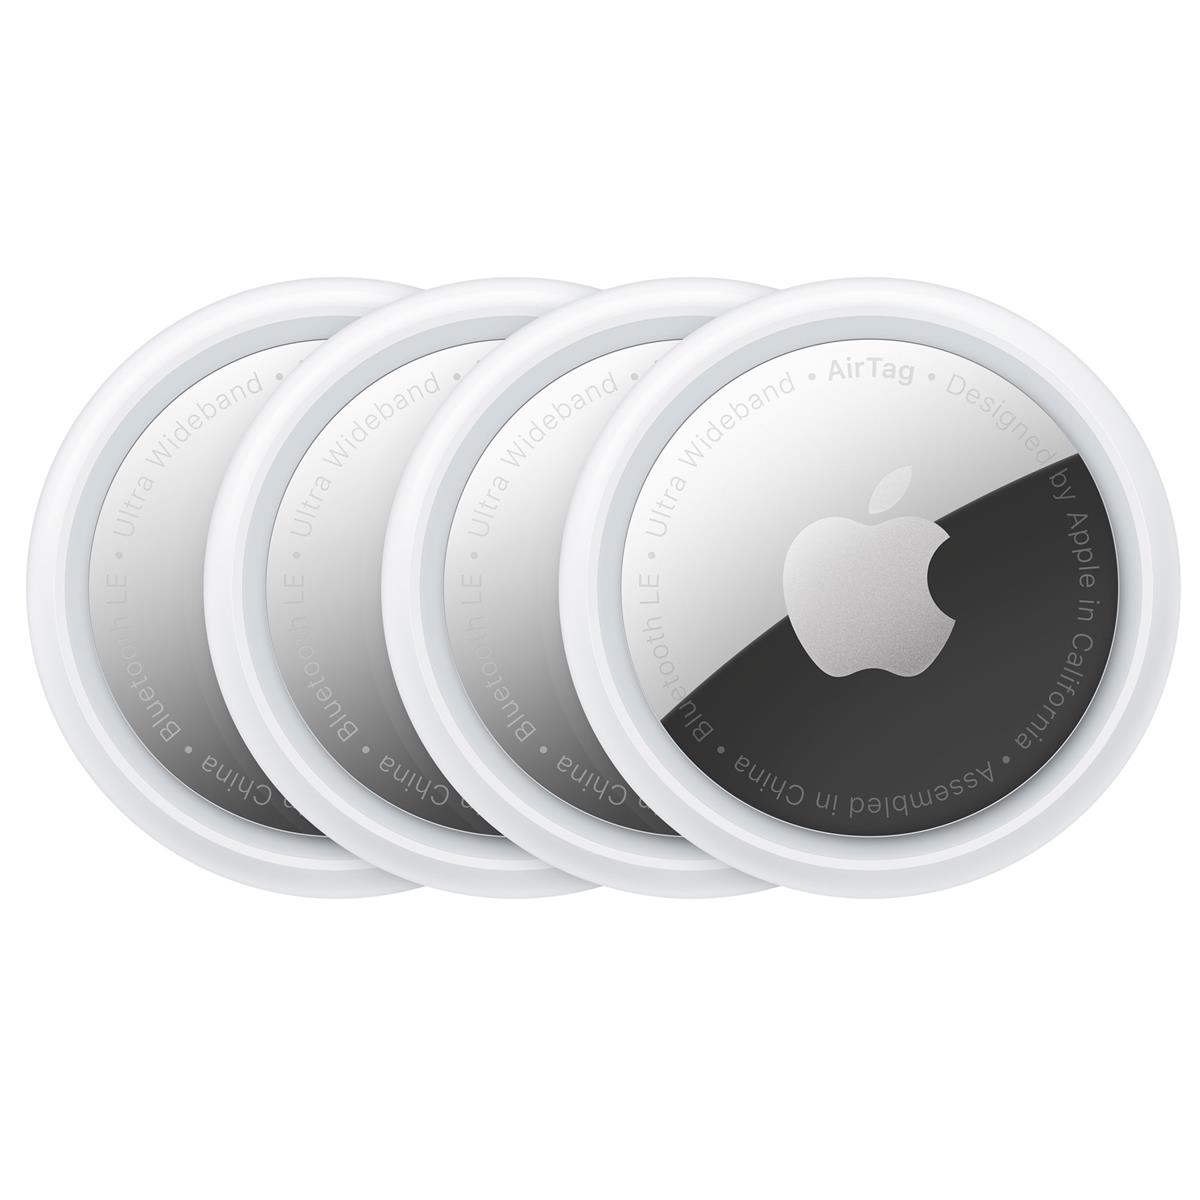 Apple AirTags, 4-pack. Adorama, $85 + free shipping